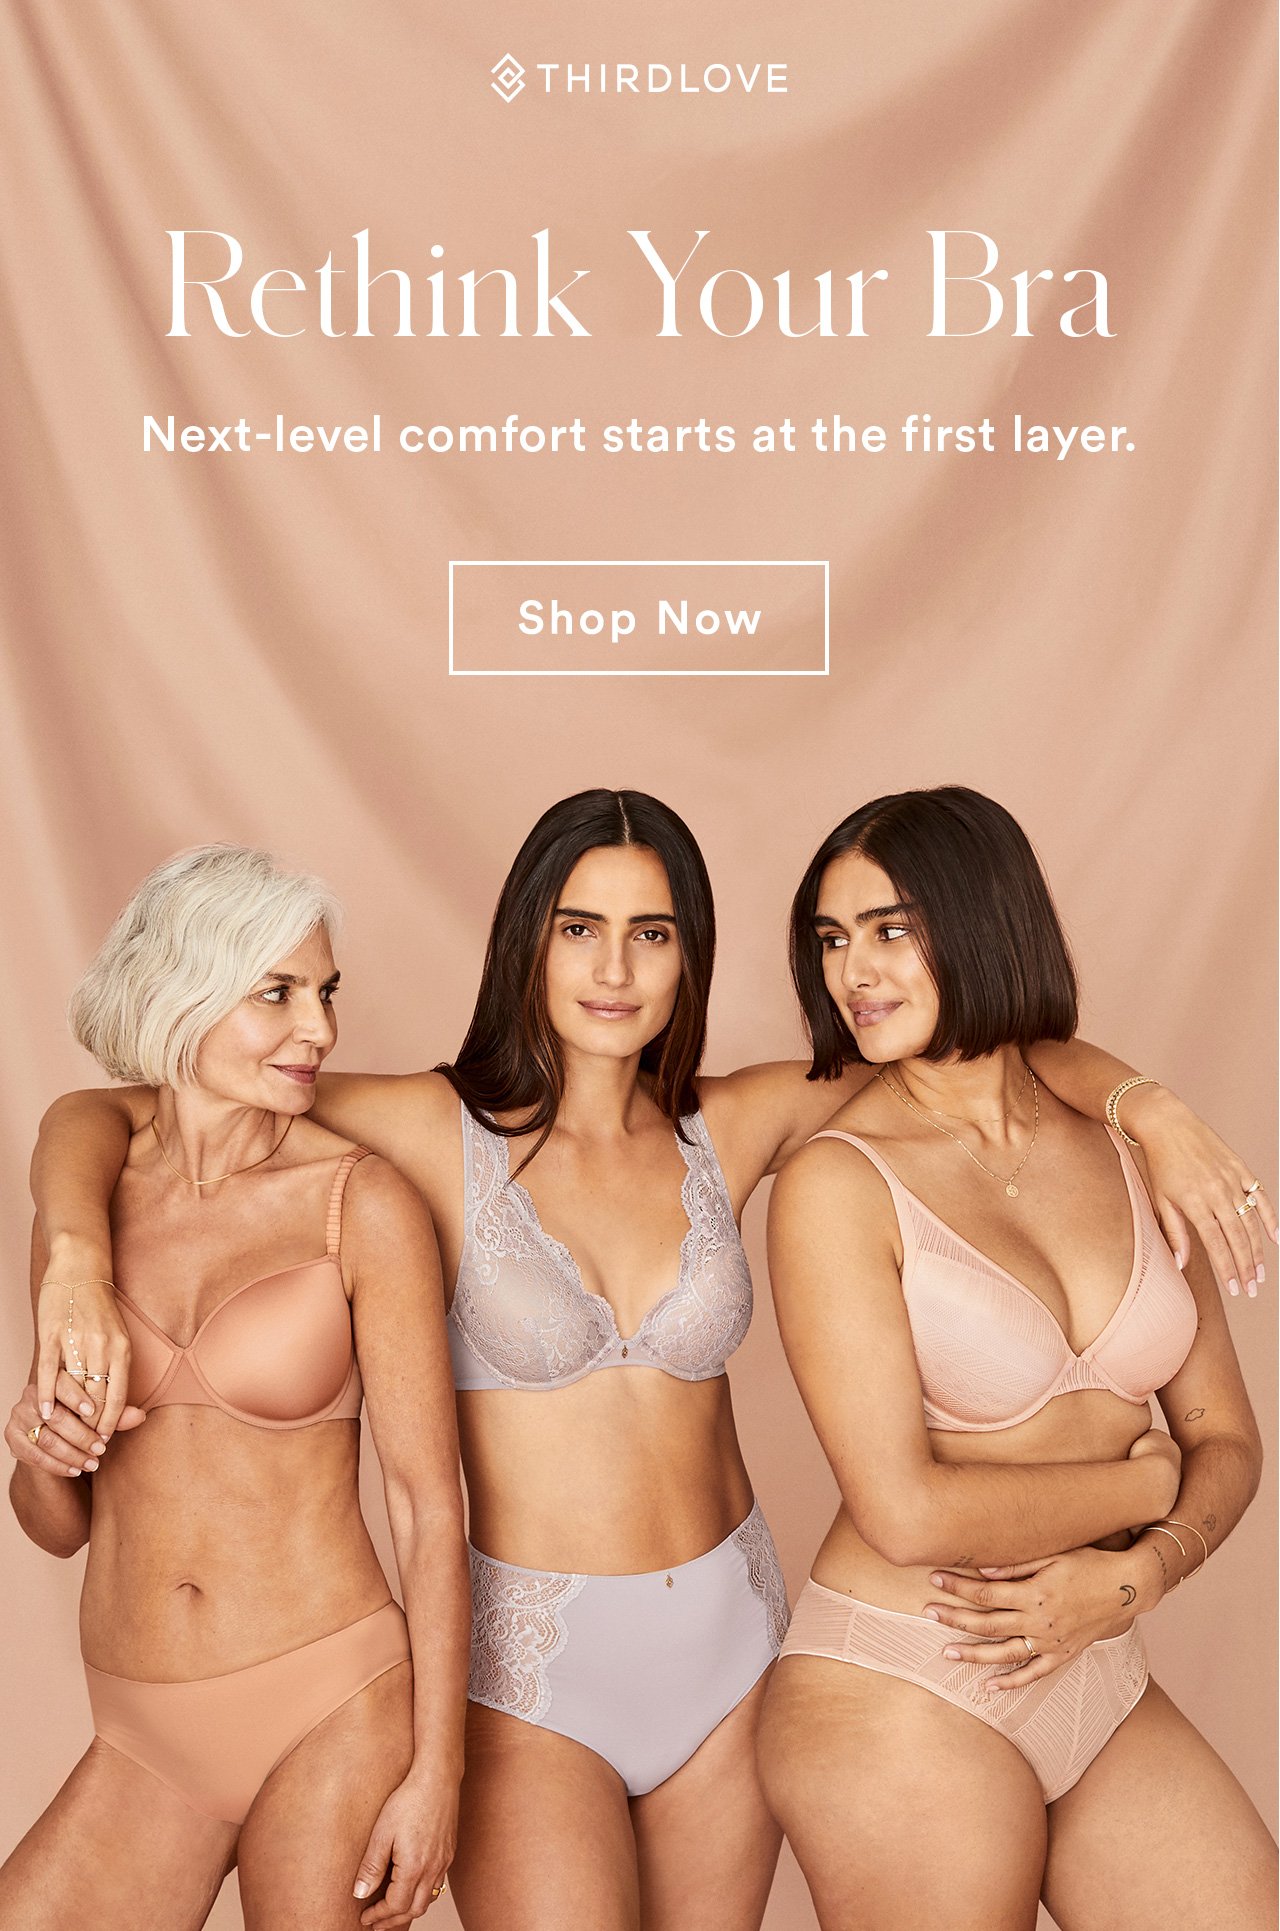 Third Love: Second skin comfort, in your size